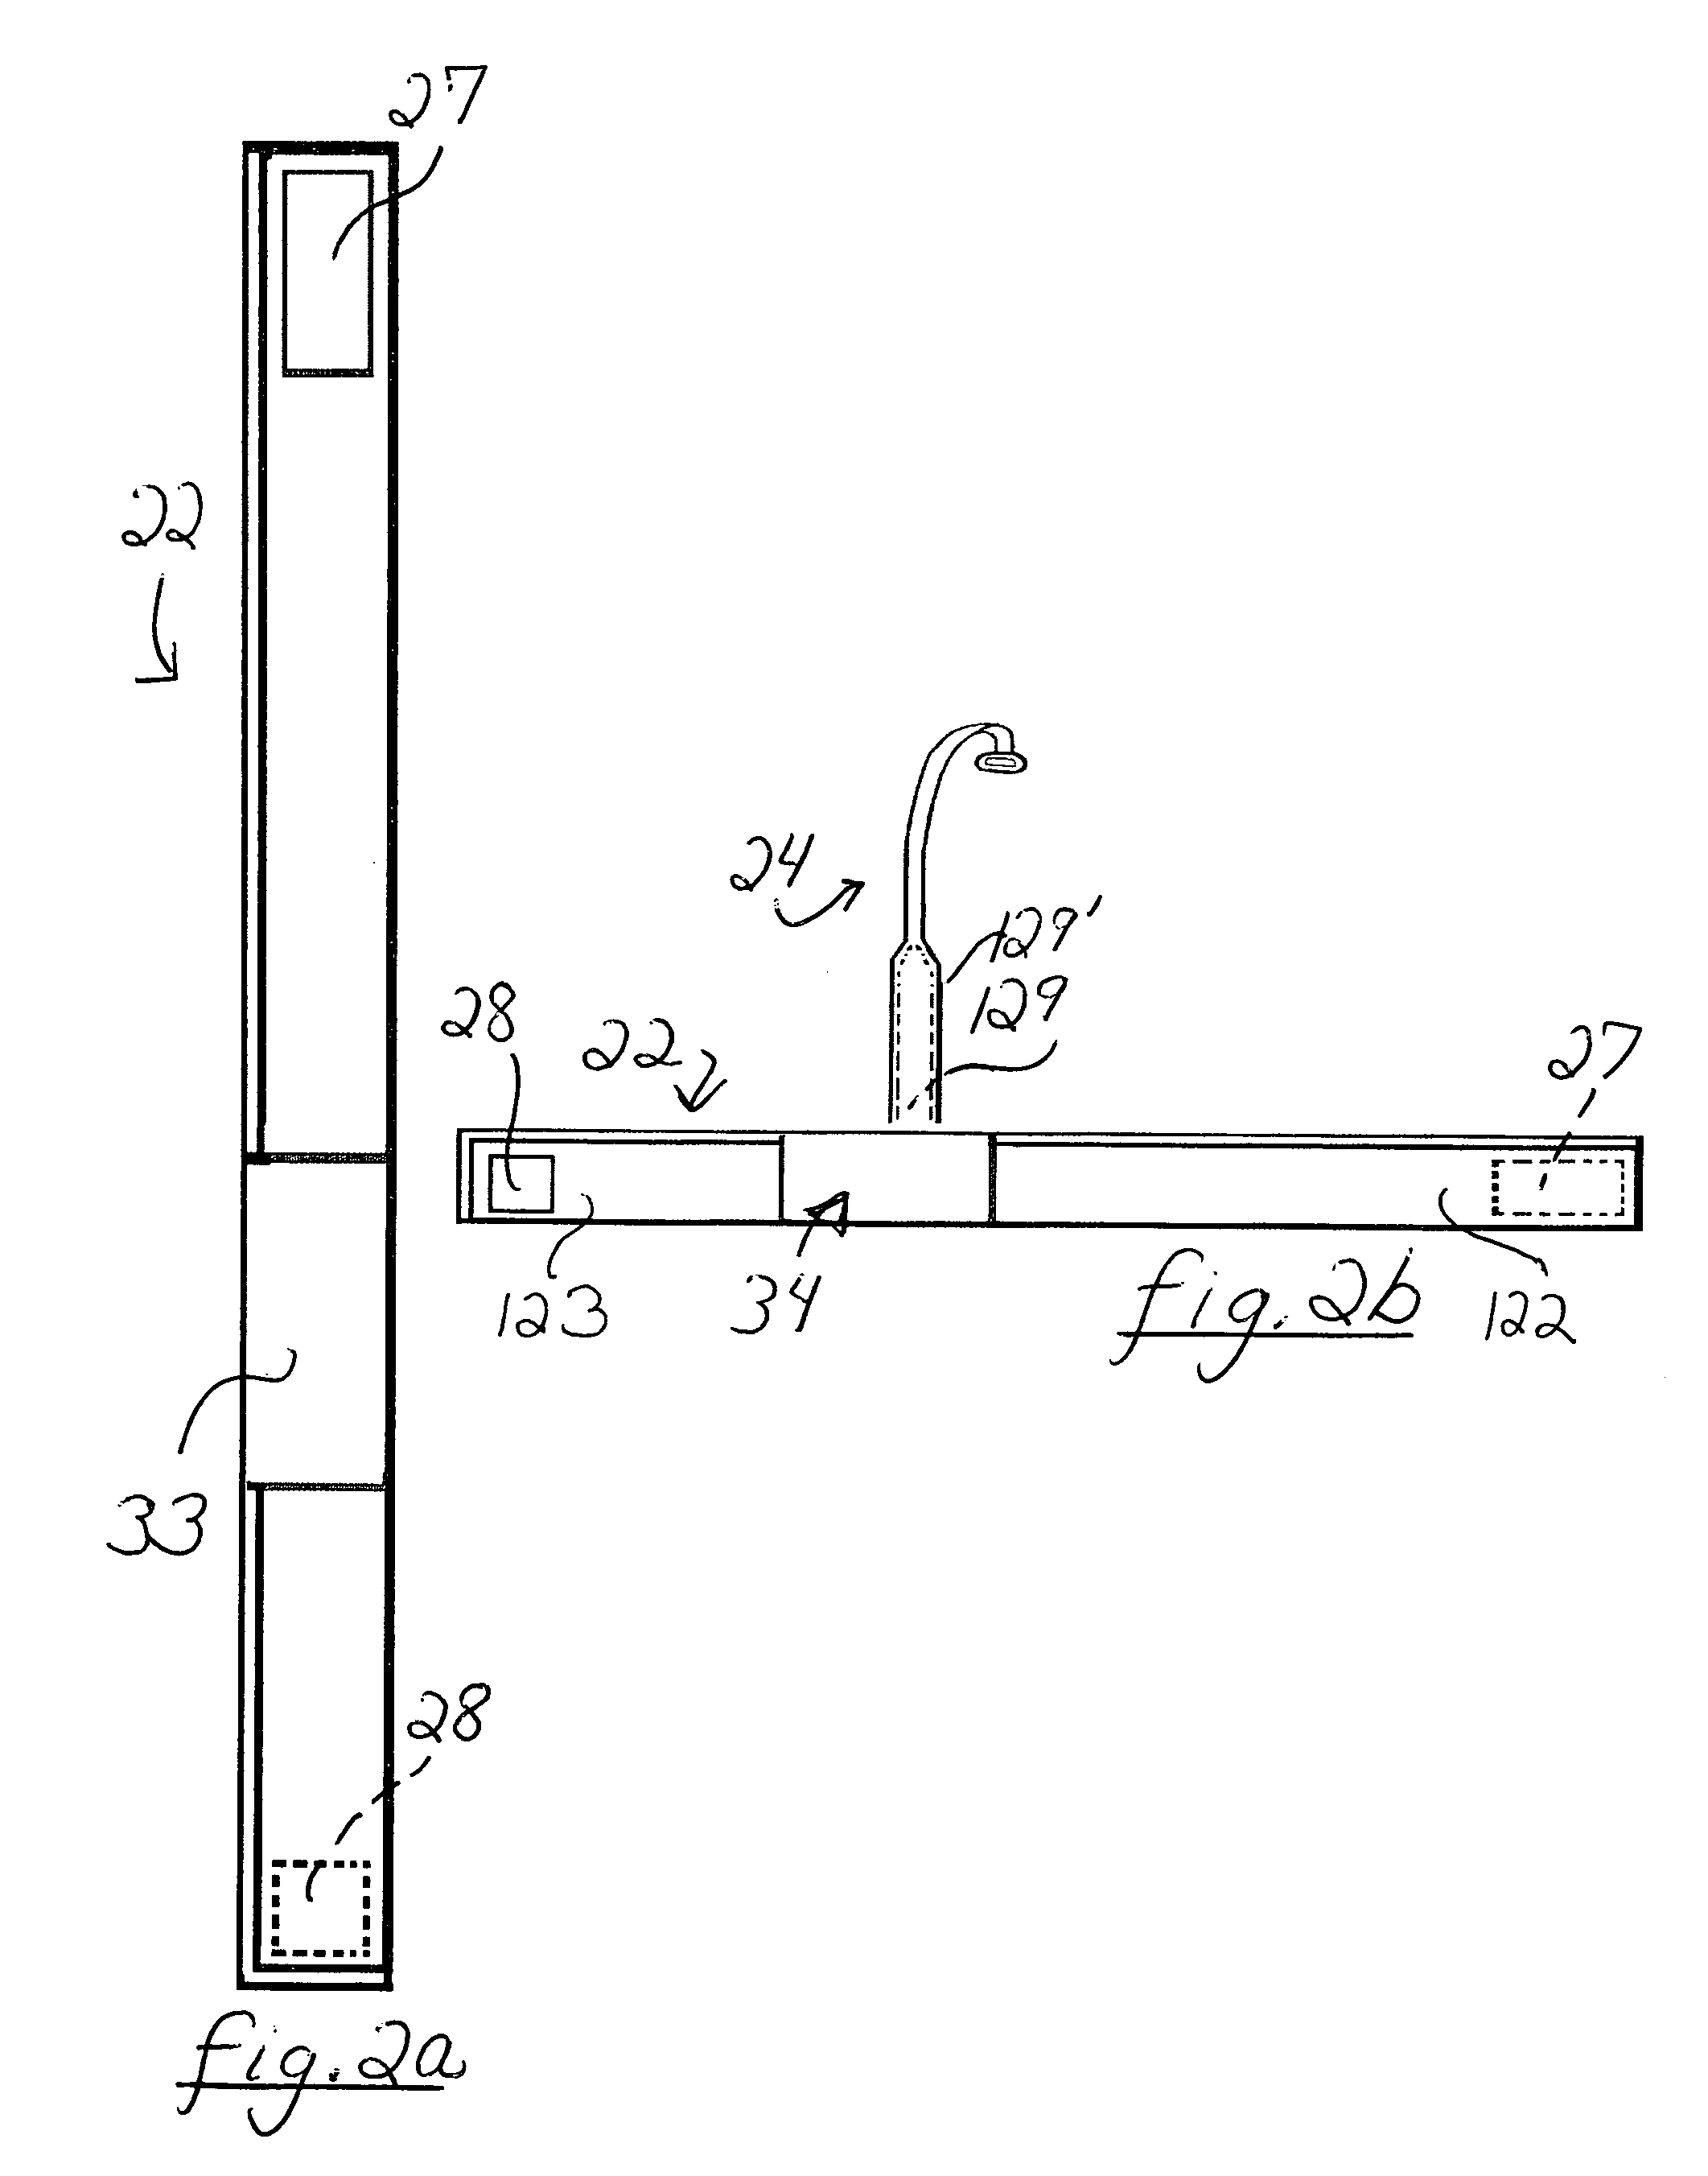 Arm sling apparatus allowing movement or total immobilization